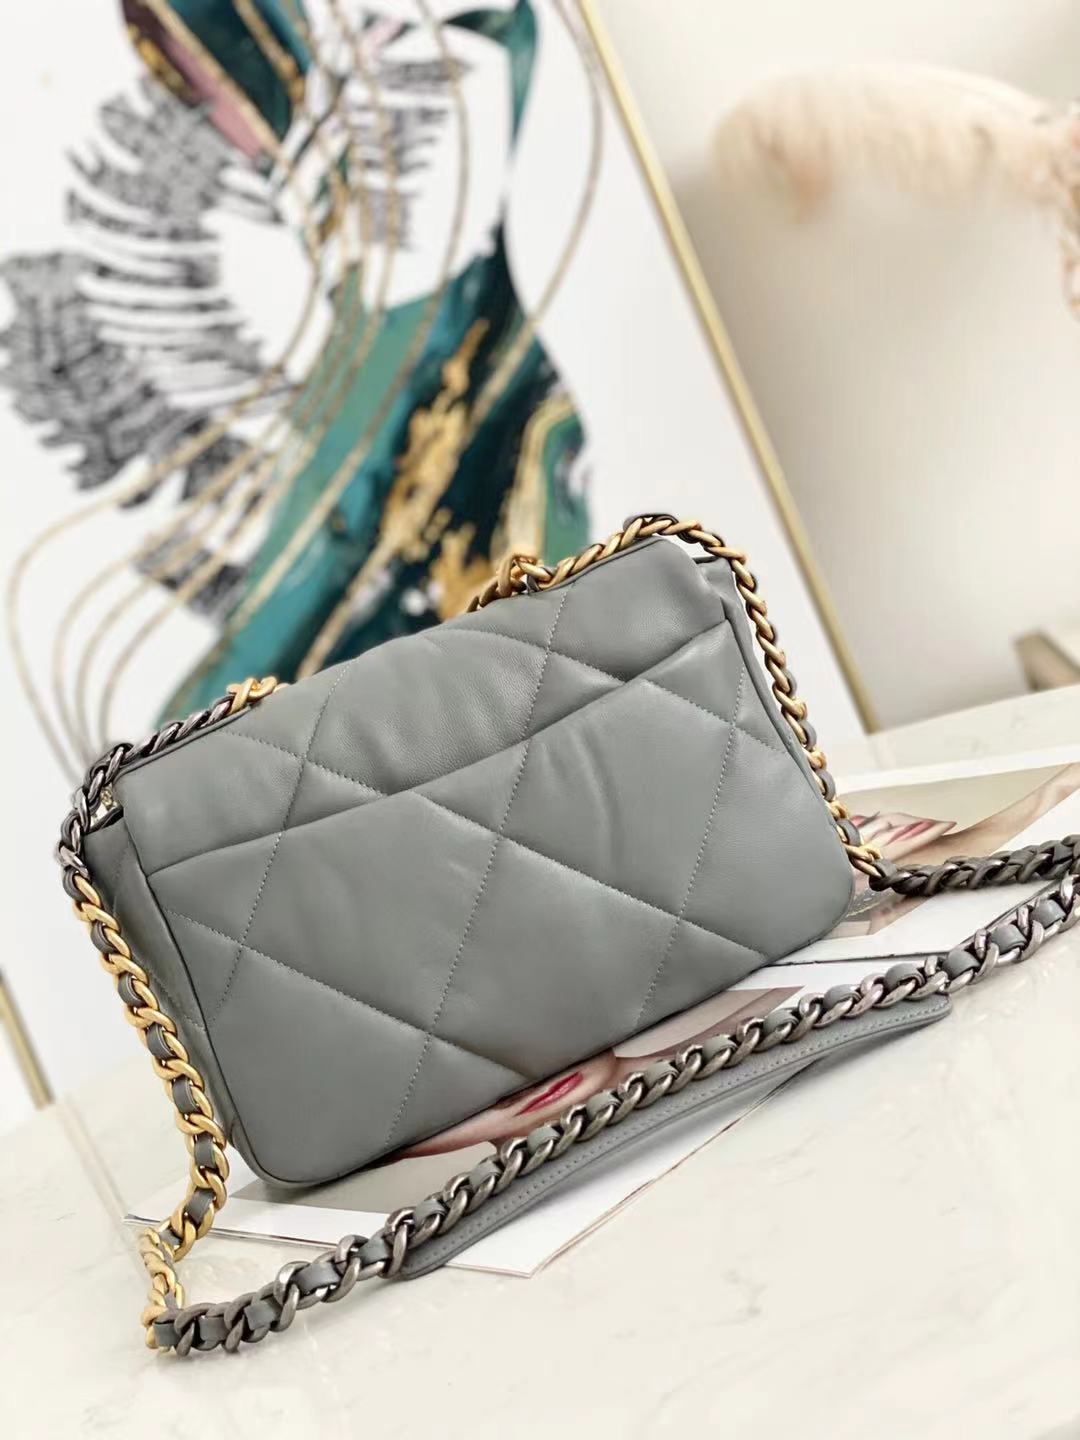 CHANEL 19 Flap Bag AS1160 AS1161 AS1162 grey